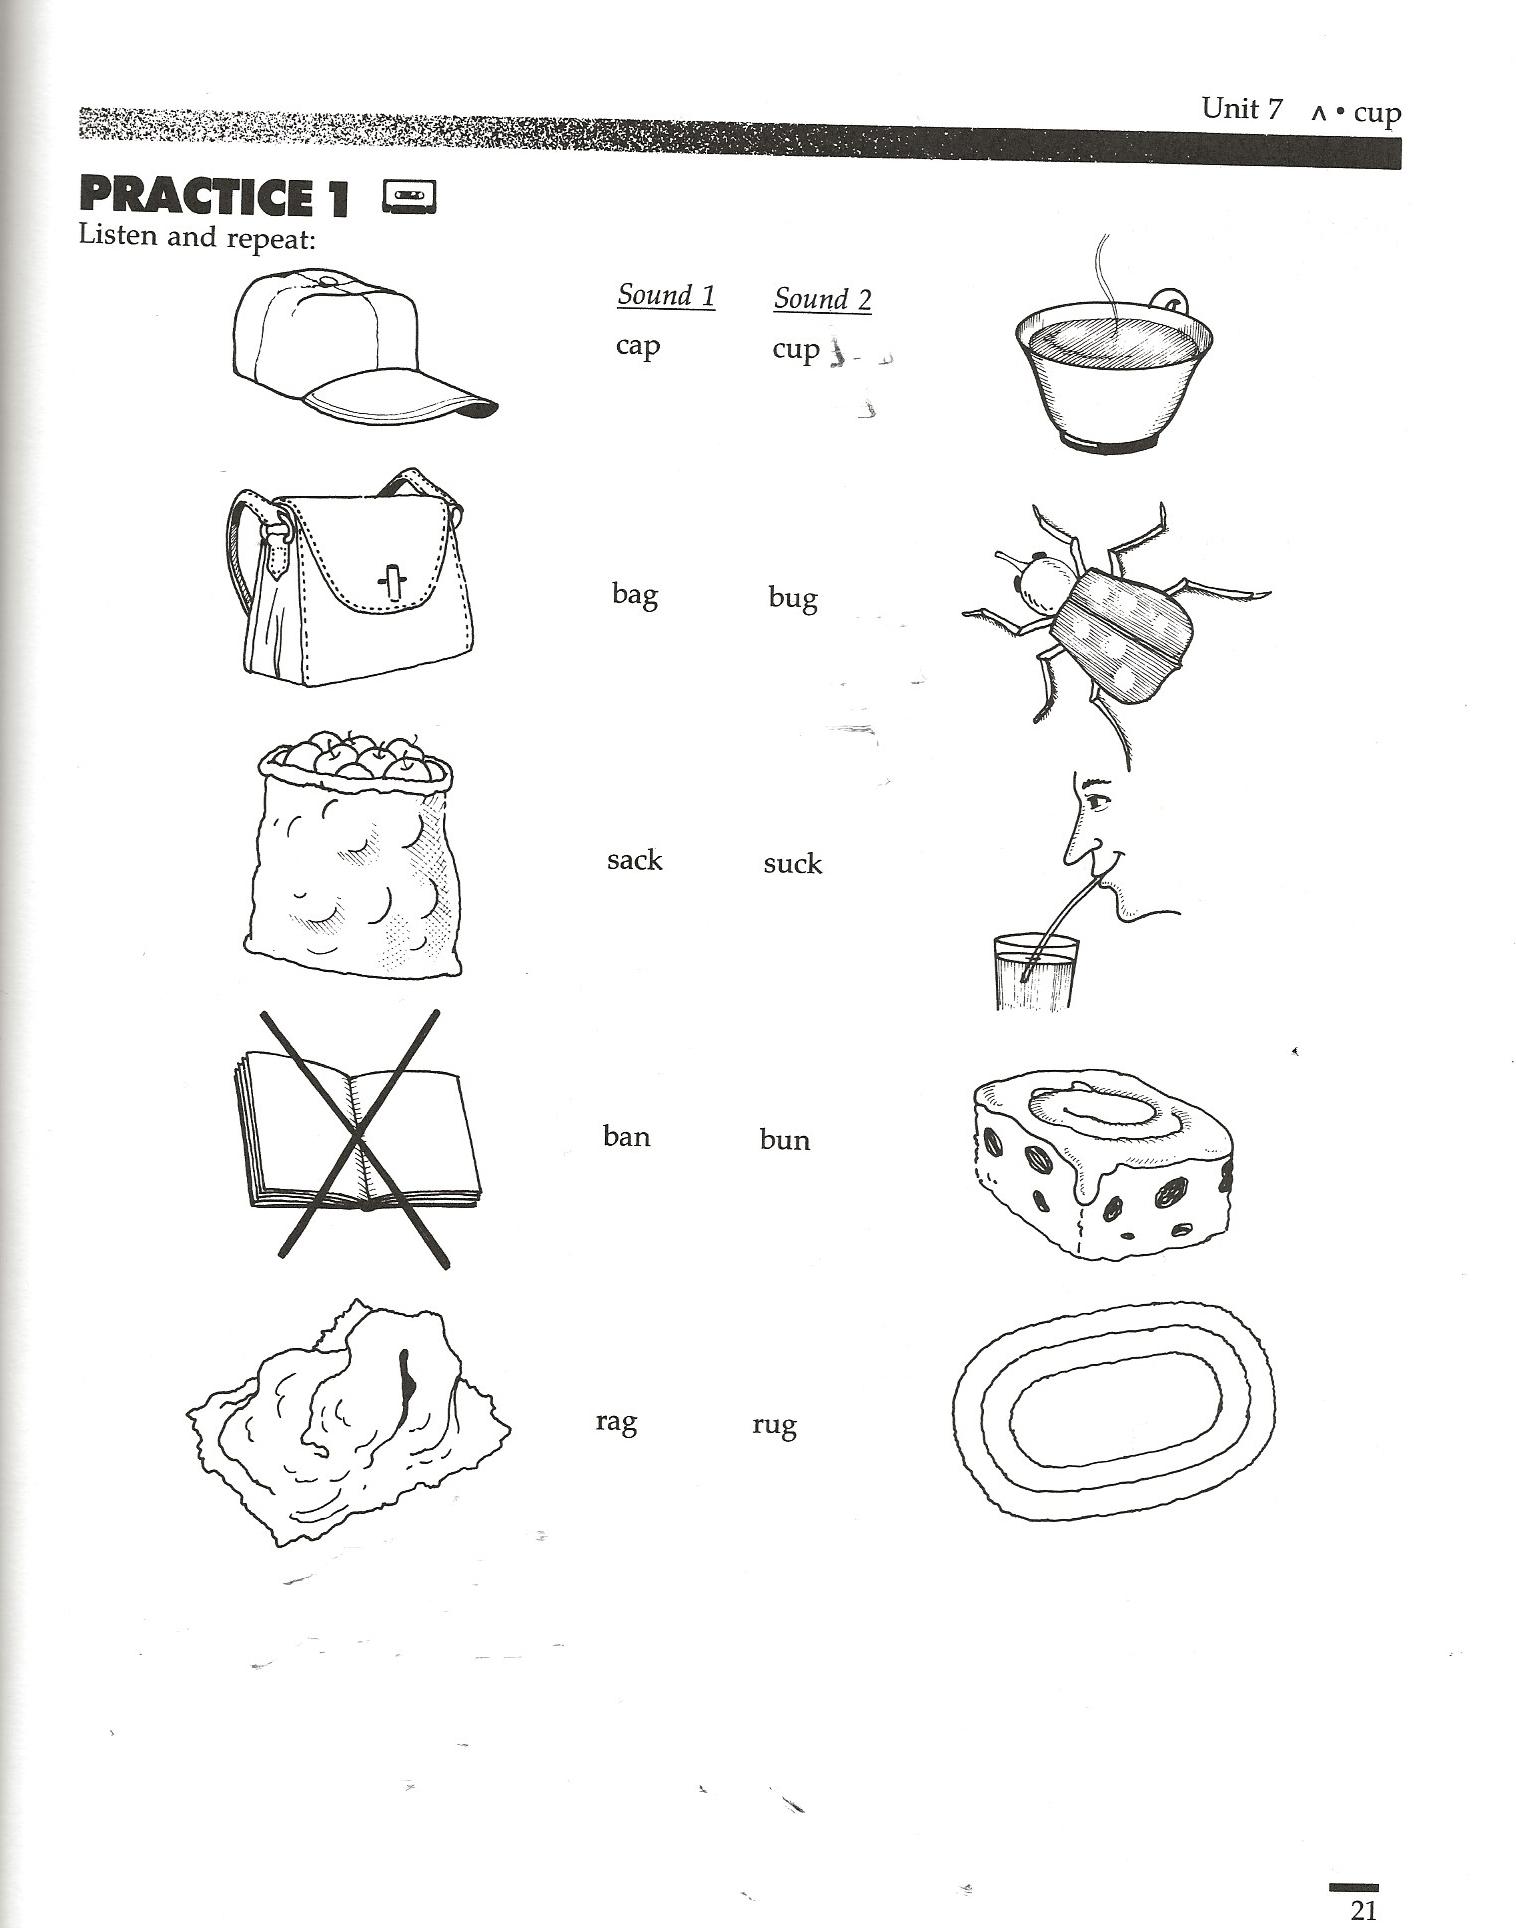 Materials that absorb water worksheet